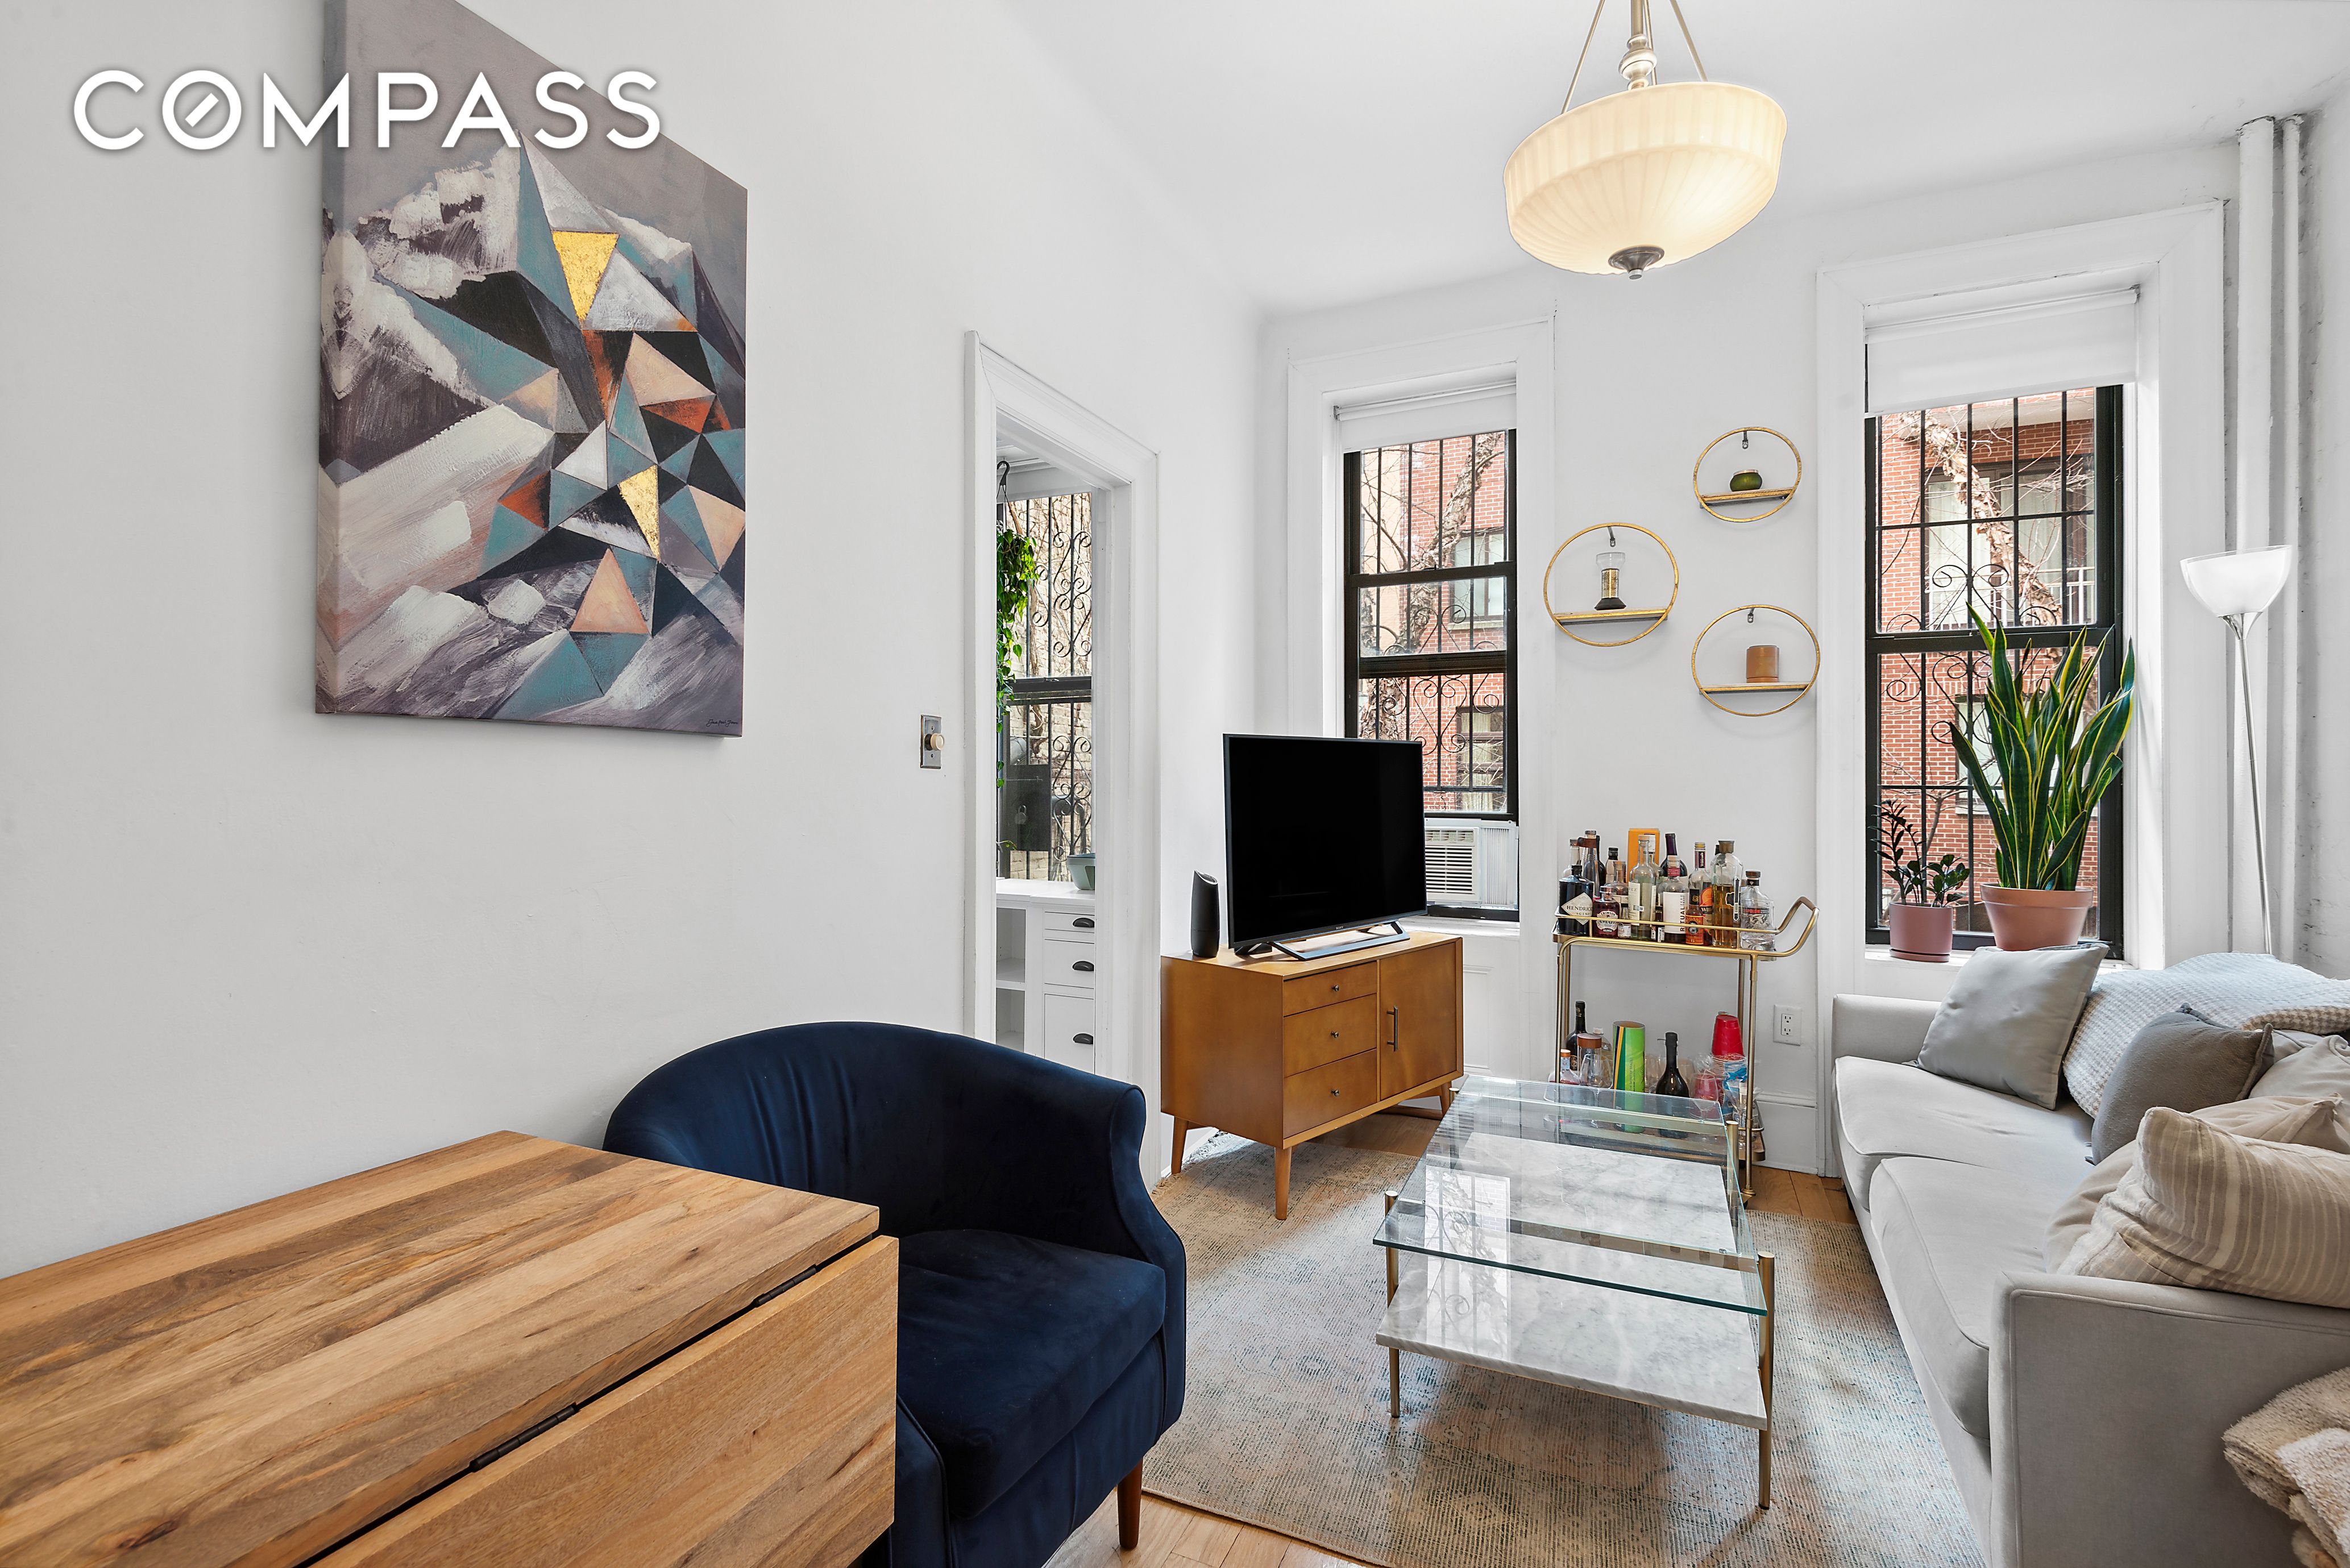 96 Perry Street B2, West Village, Downtown, NYC - 2 Bedrooms  
1 Bathrooms  
3 Rooms - 